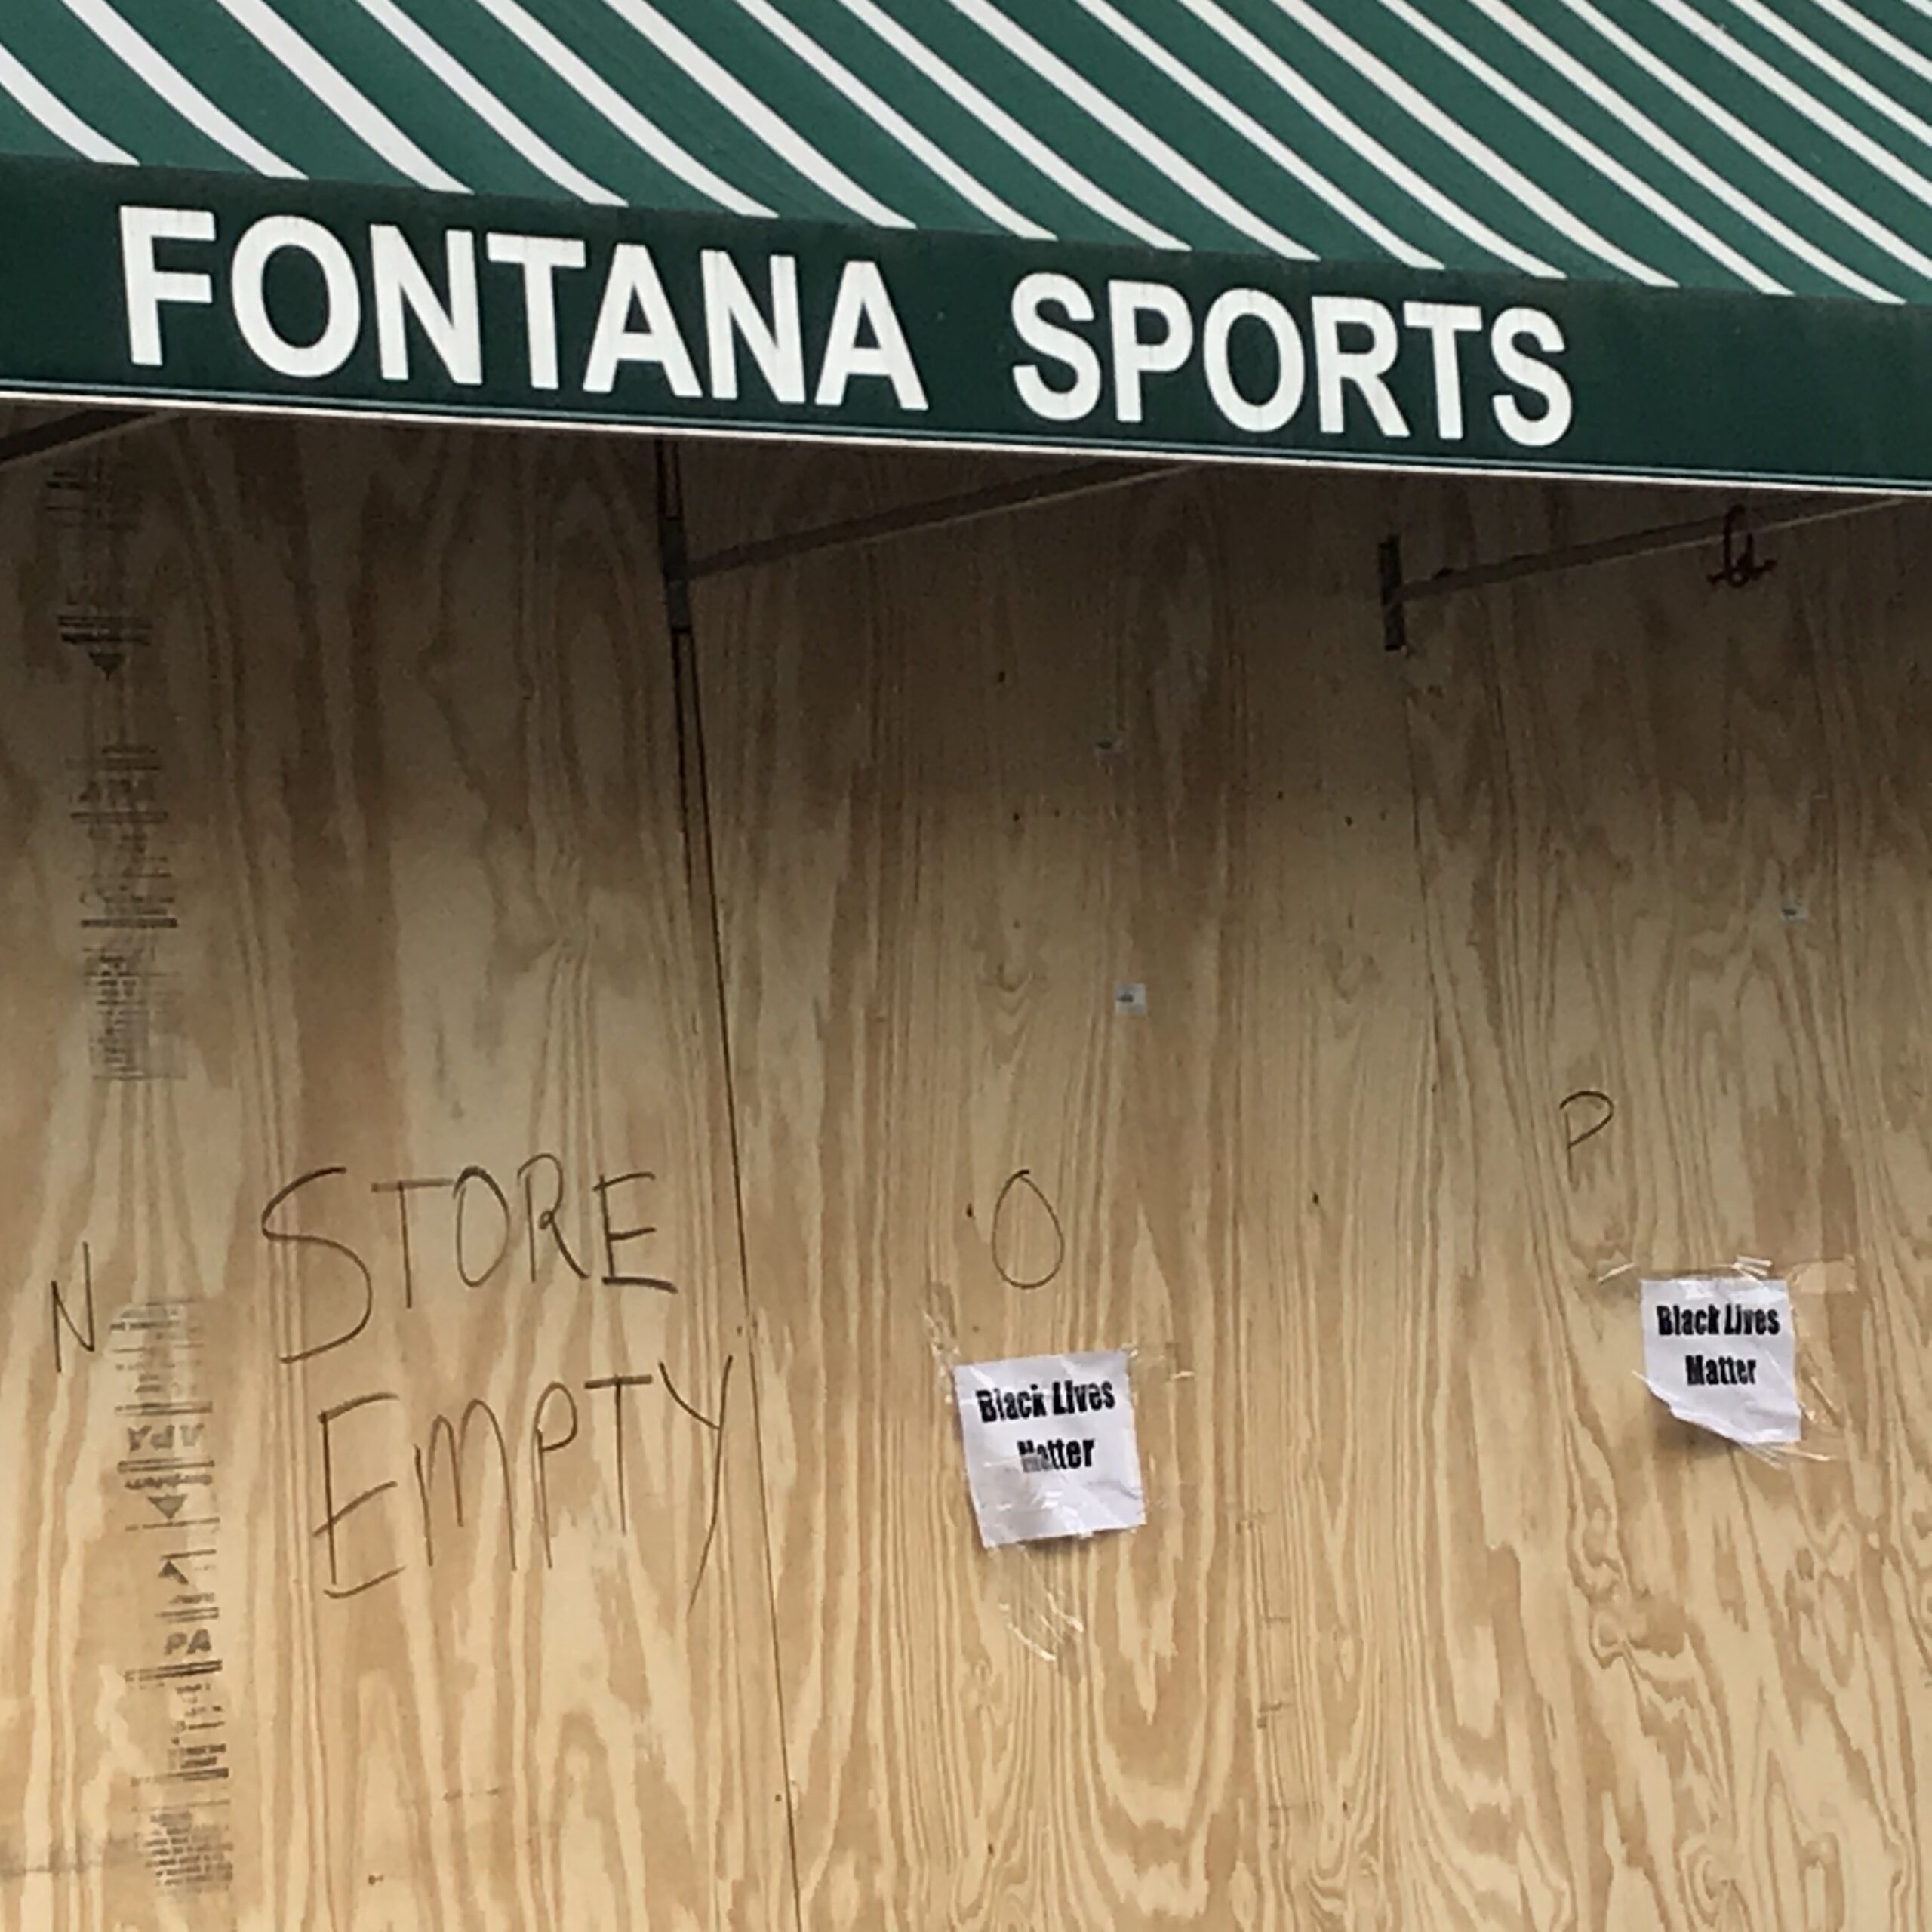 Signs supporting the Black Lives Matter movement are posted on downtown Madison storefronts